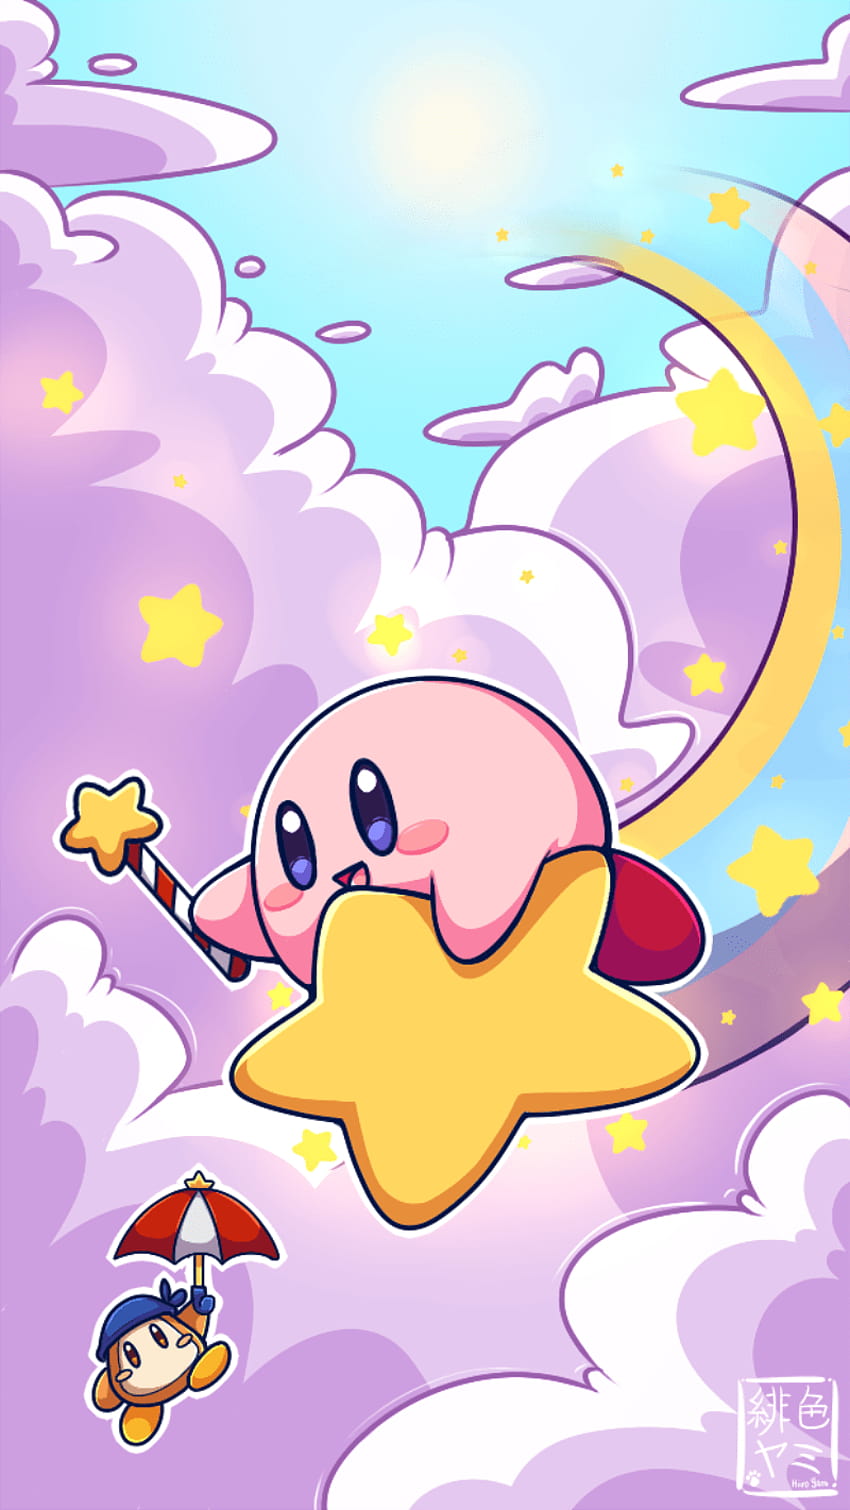 Share 66+ kirby wallpapers latest - in.cdgdbentre